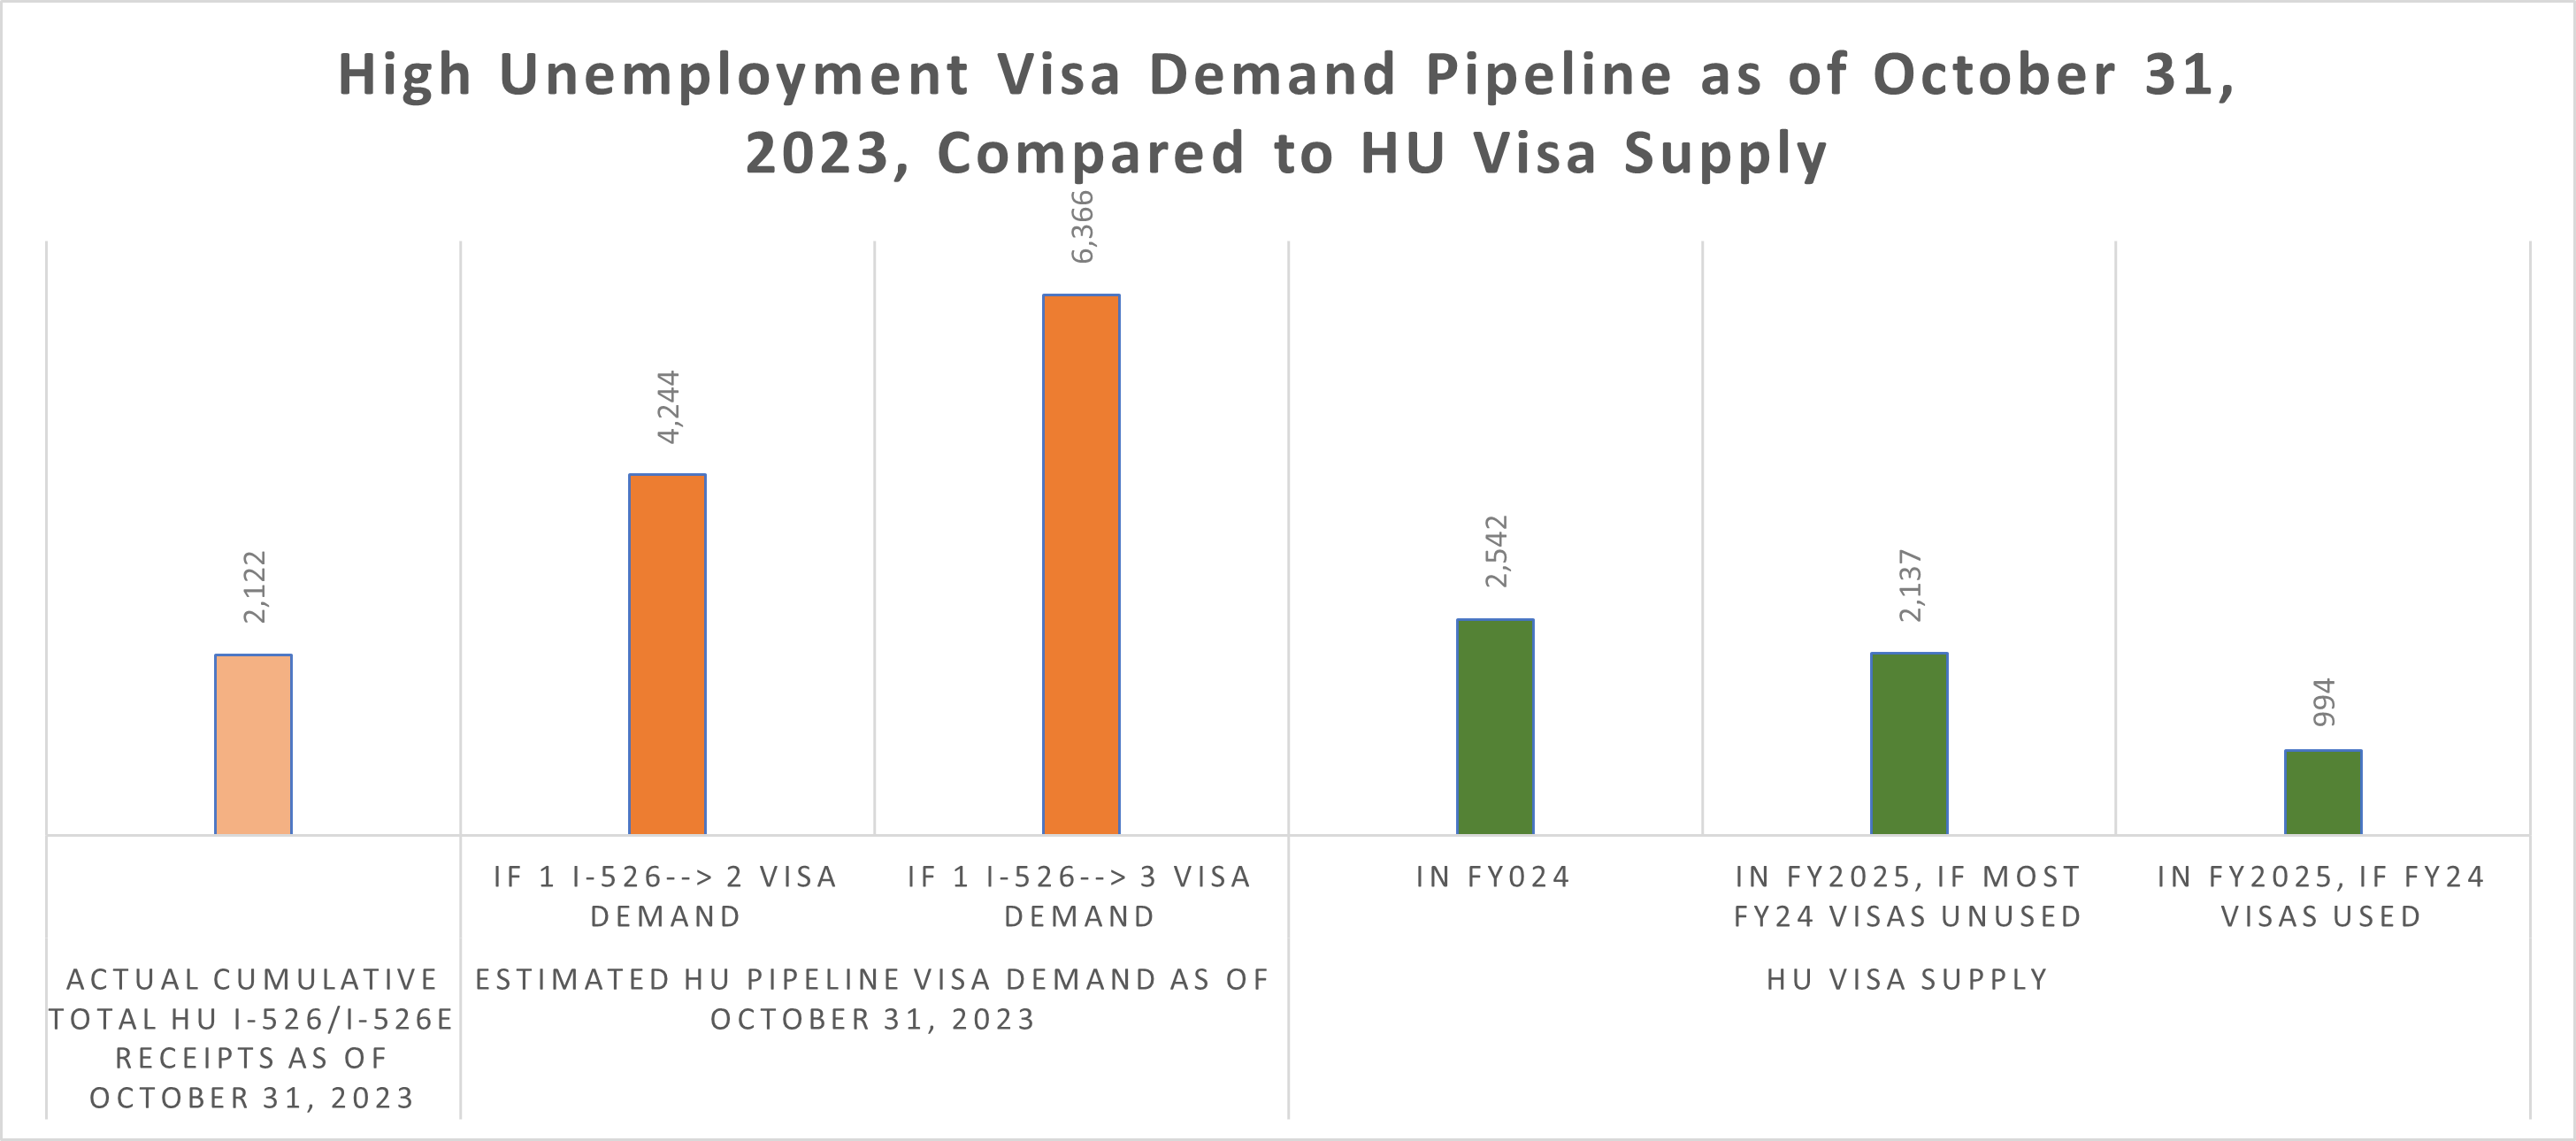 High Unemployment Visa Demand Pipeline as of October 31, 2023, Compared to HU Visa Supply